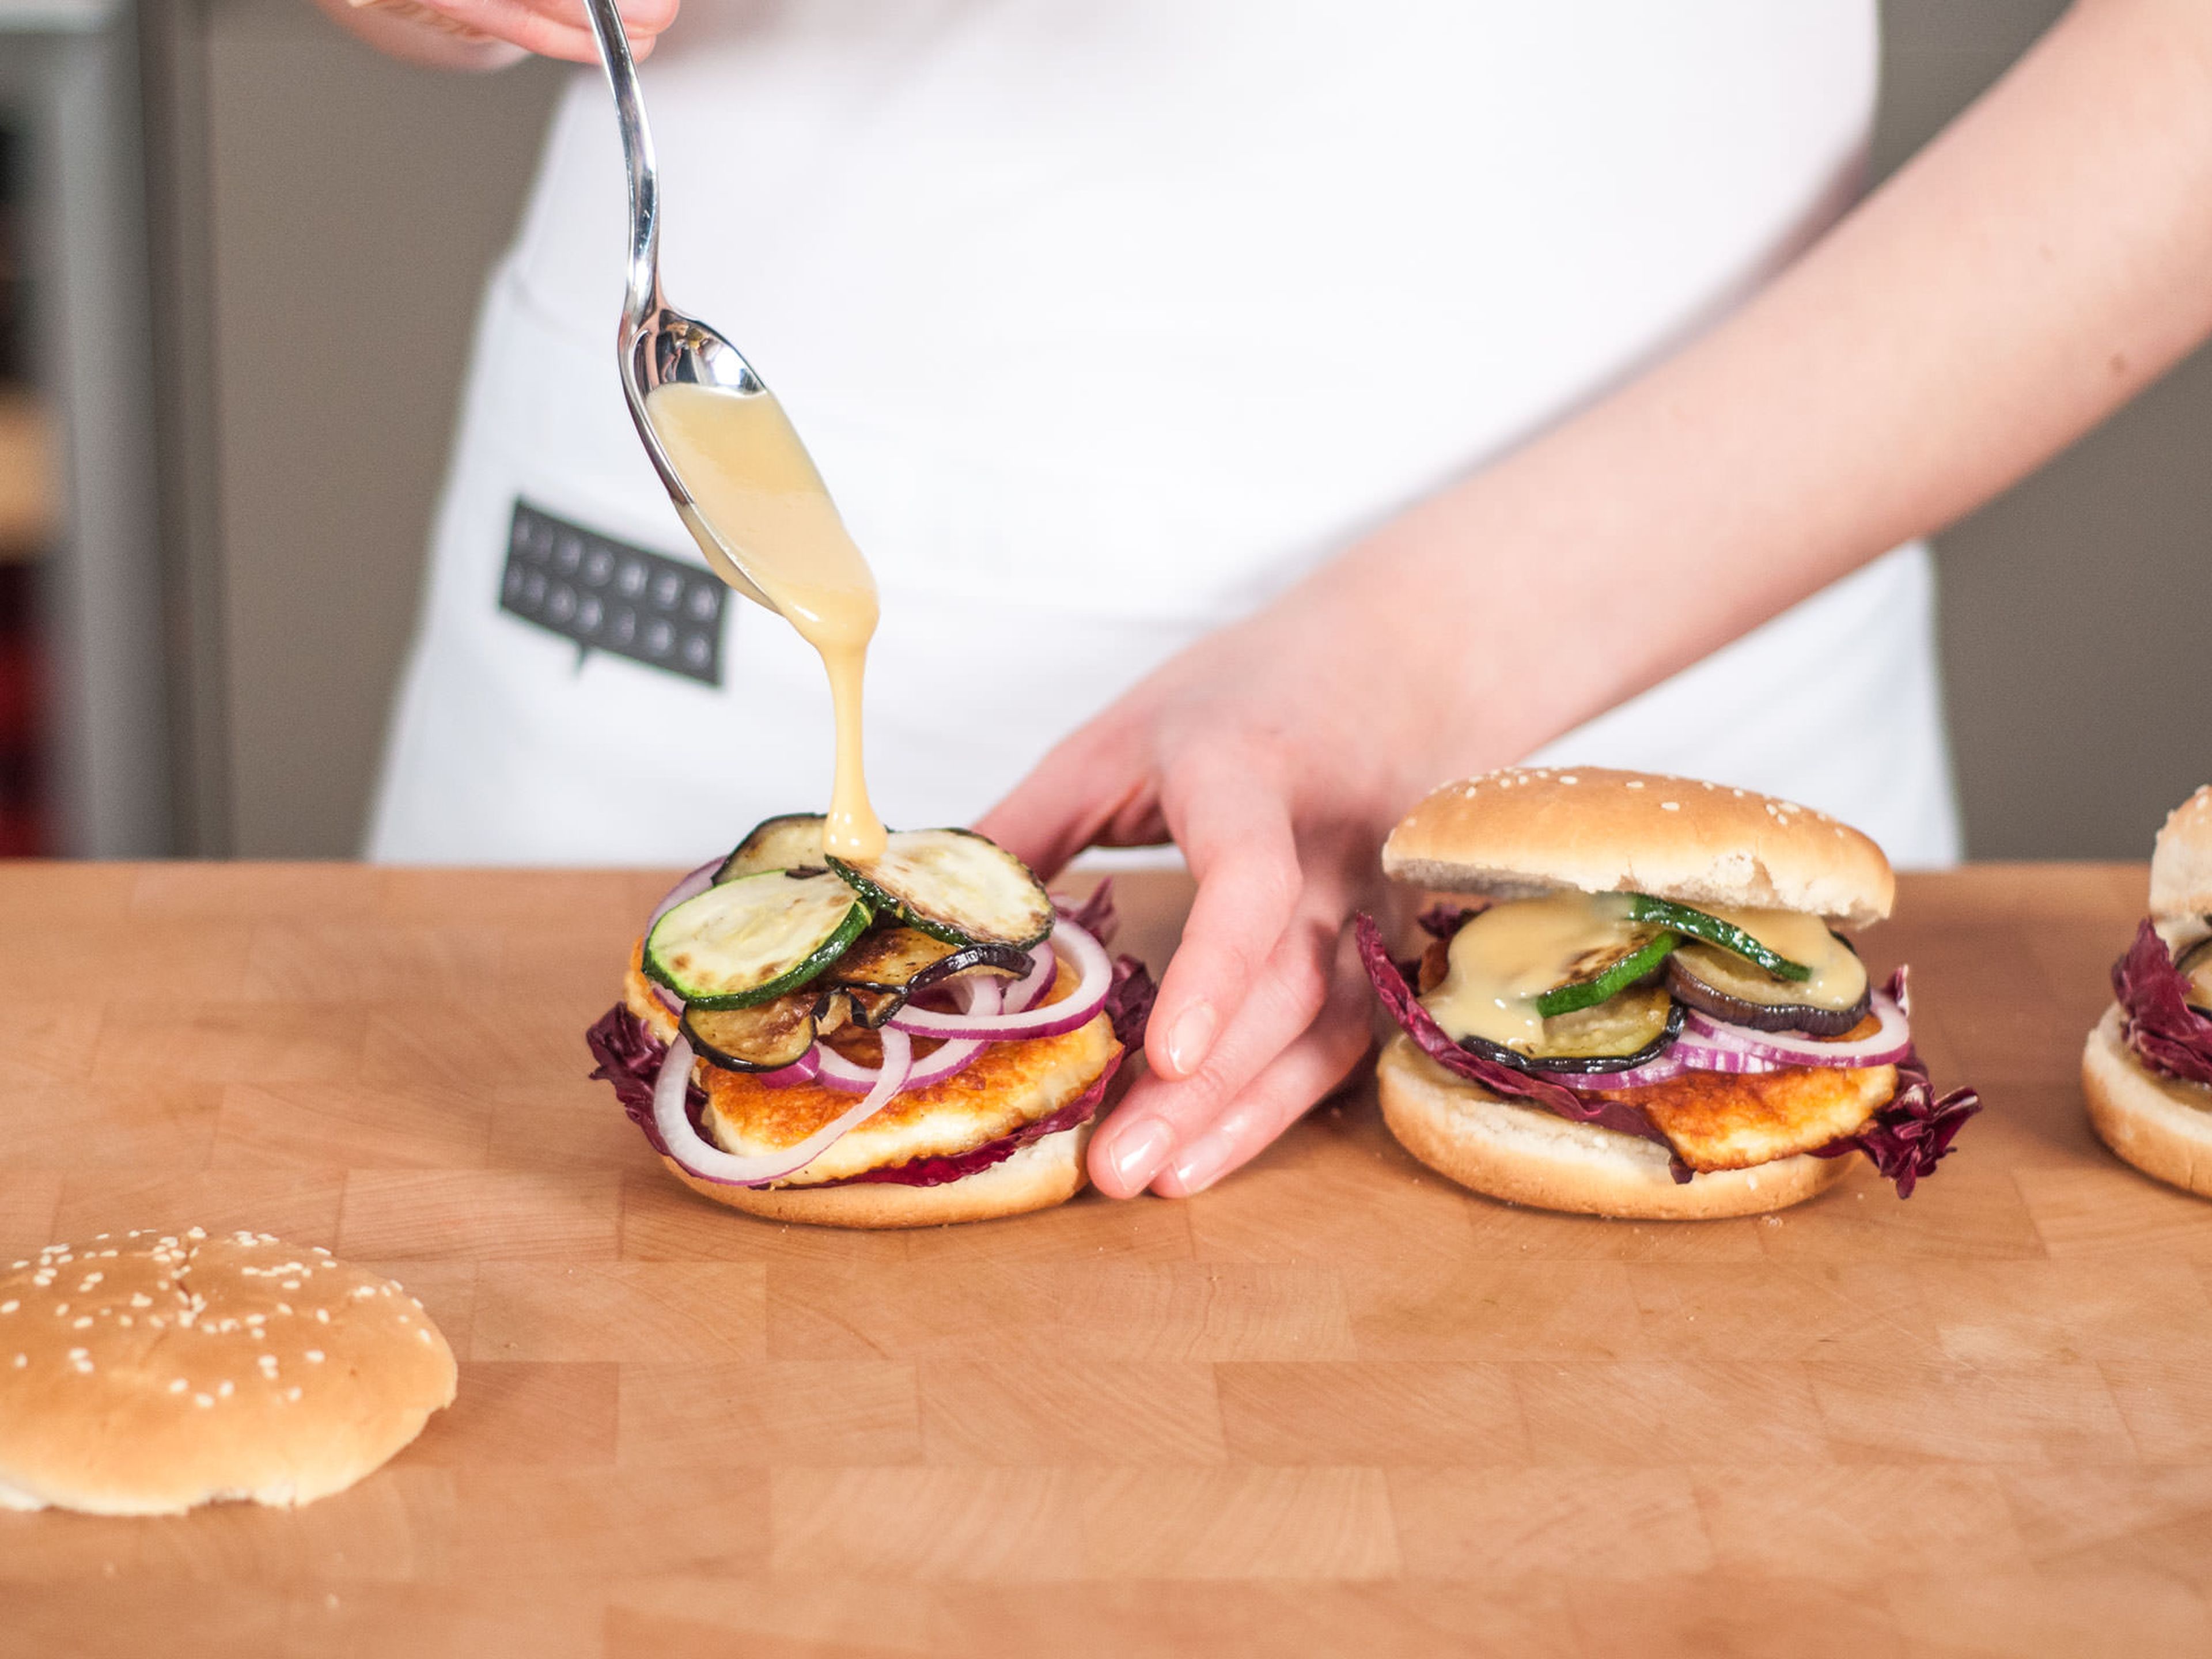 Brush each burger bun with honey mustard sauce. Place radicchio on the bottom part and layer cheese, zucchini, eggplant, and onion rings on top. Pick mint leaves and place on top of vegetables. Drizzle with more sauce, cover with the upper part of the bun, and enjoy with homemade french fries!